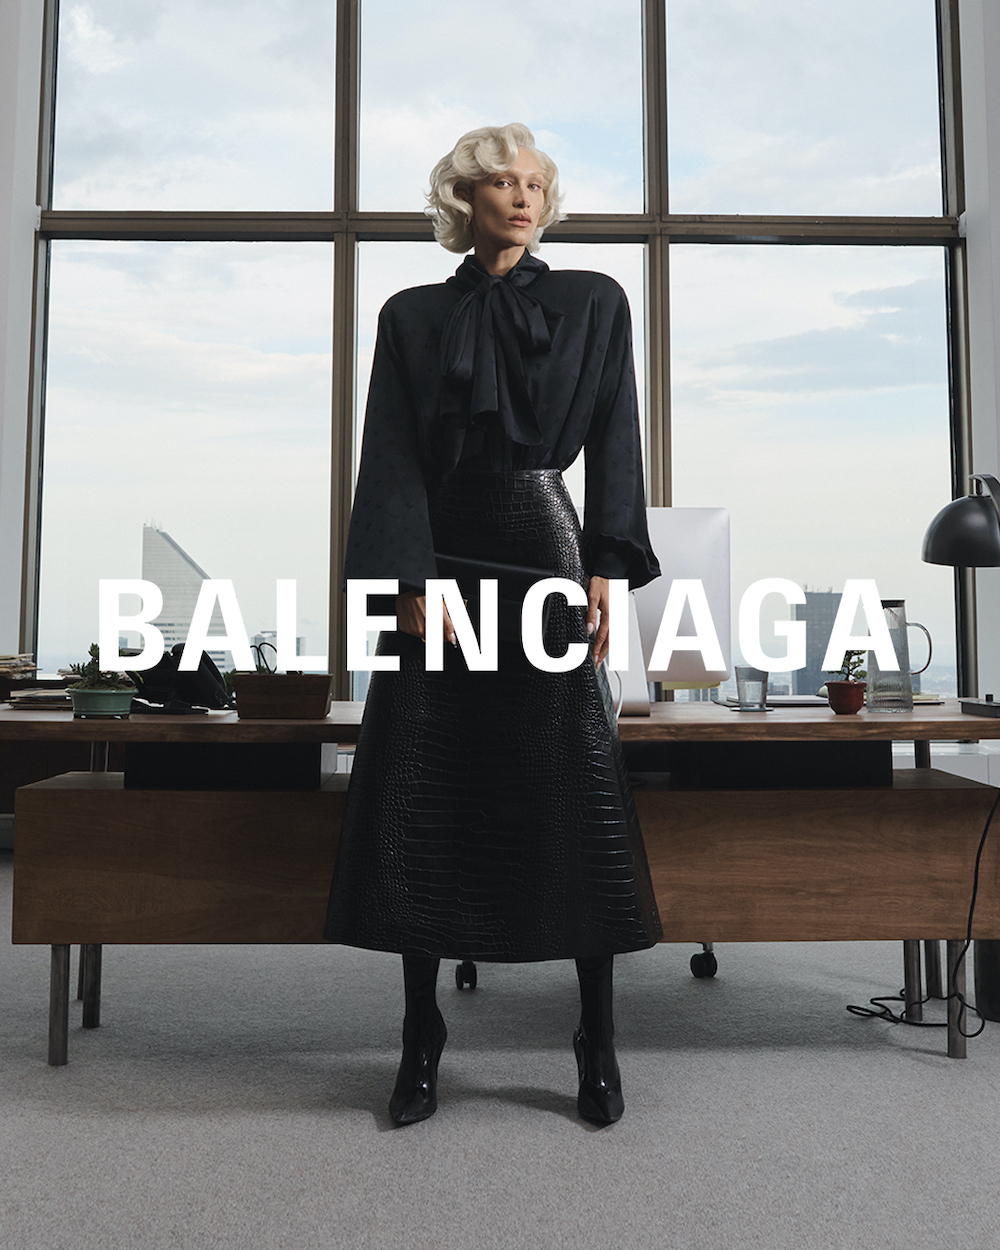 Balenciaga Apologizes After Being Blasted Over Ad Showing Children Holding  Teddy Bears in Bondage  23112022 Sputnik International